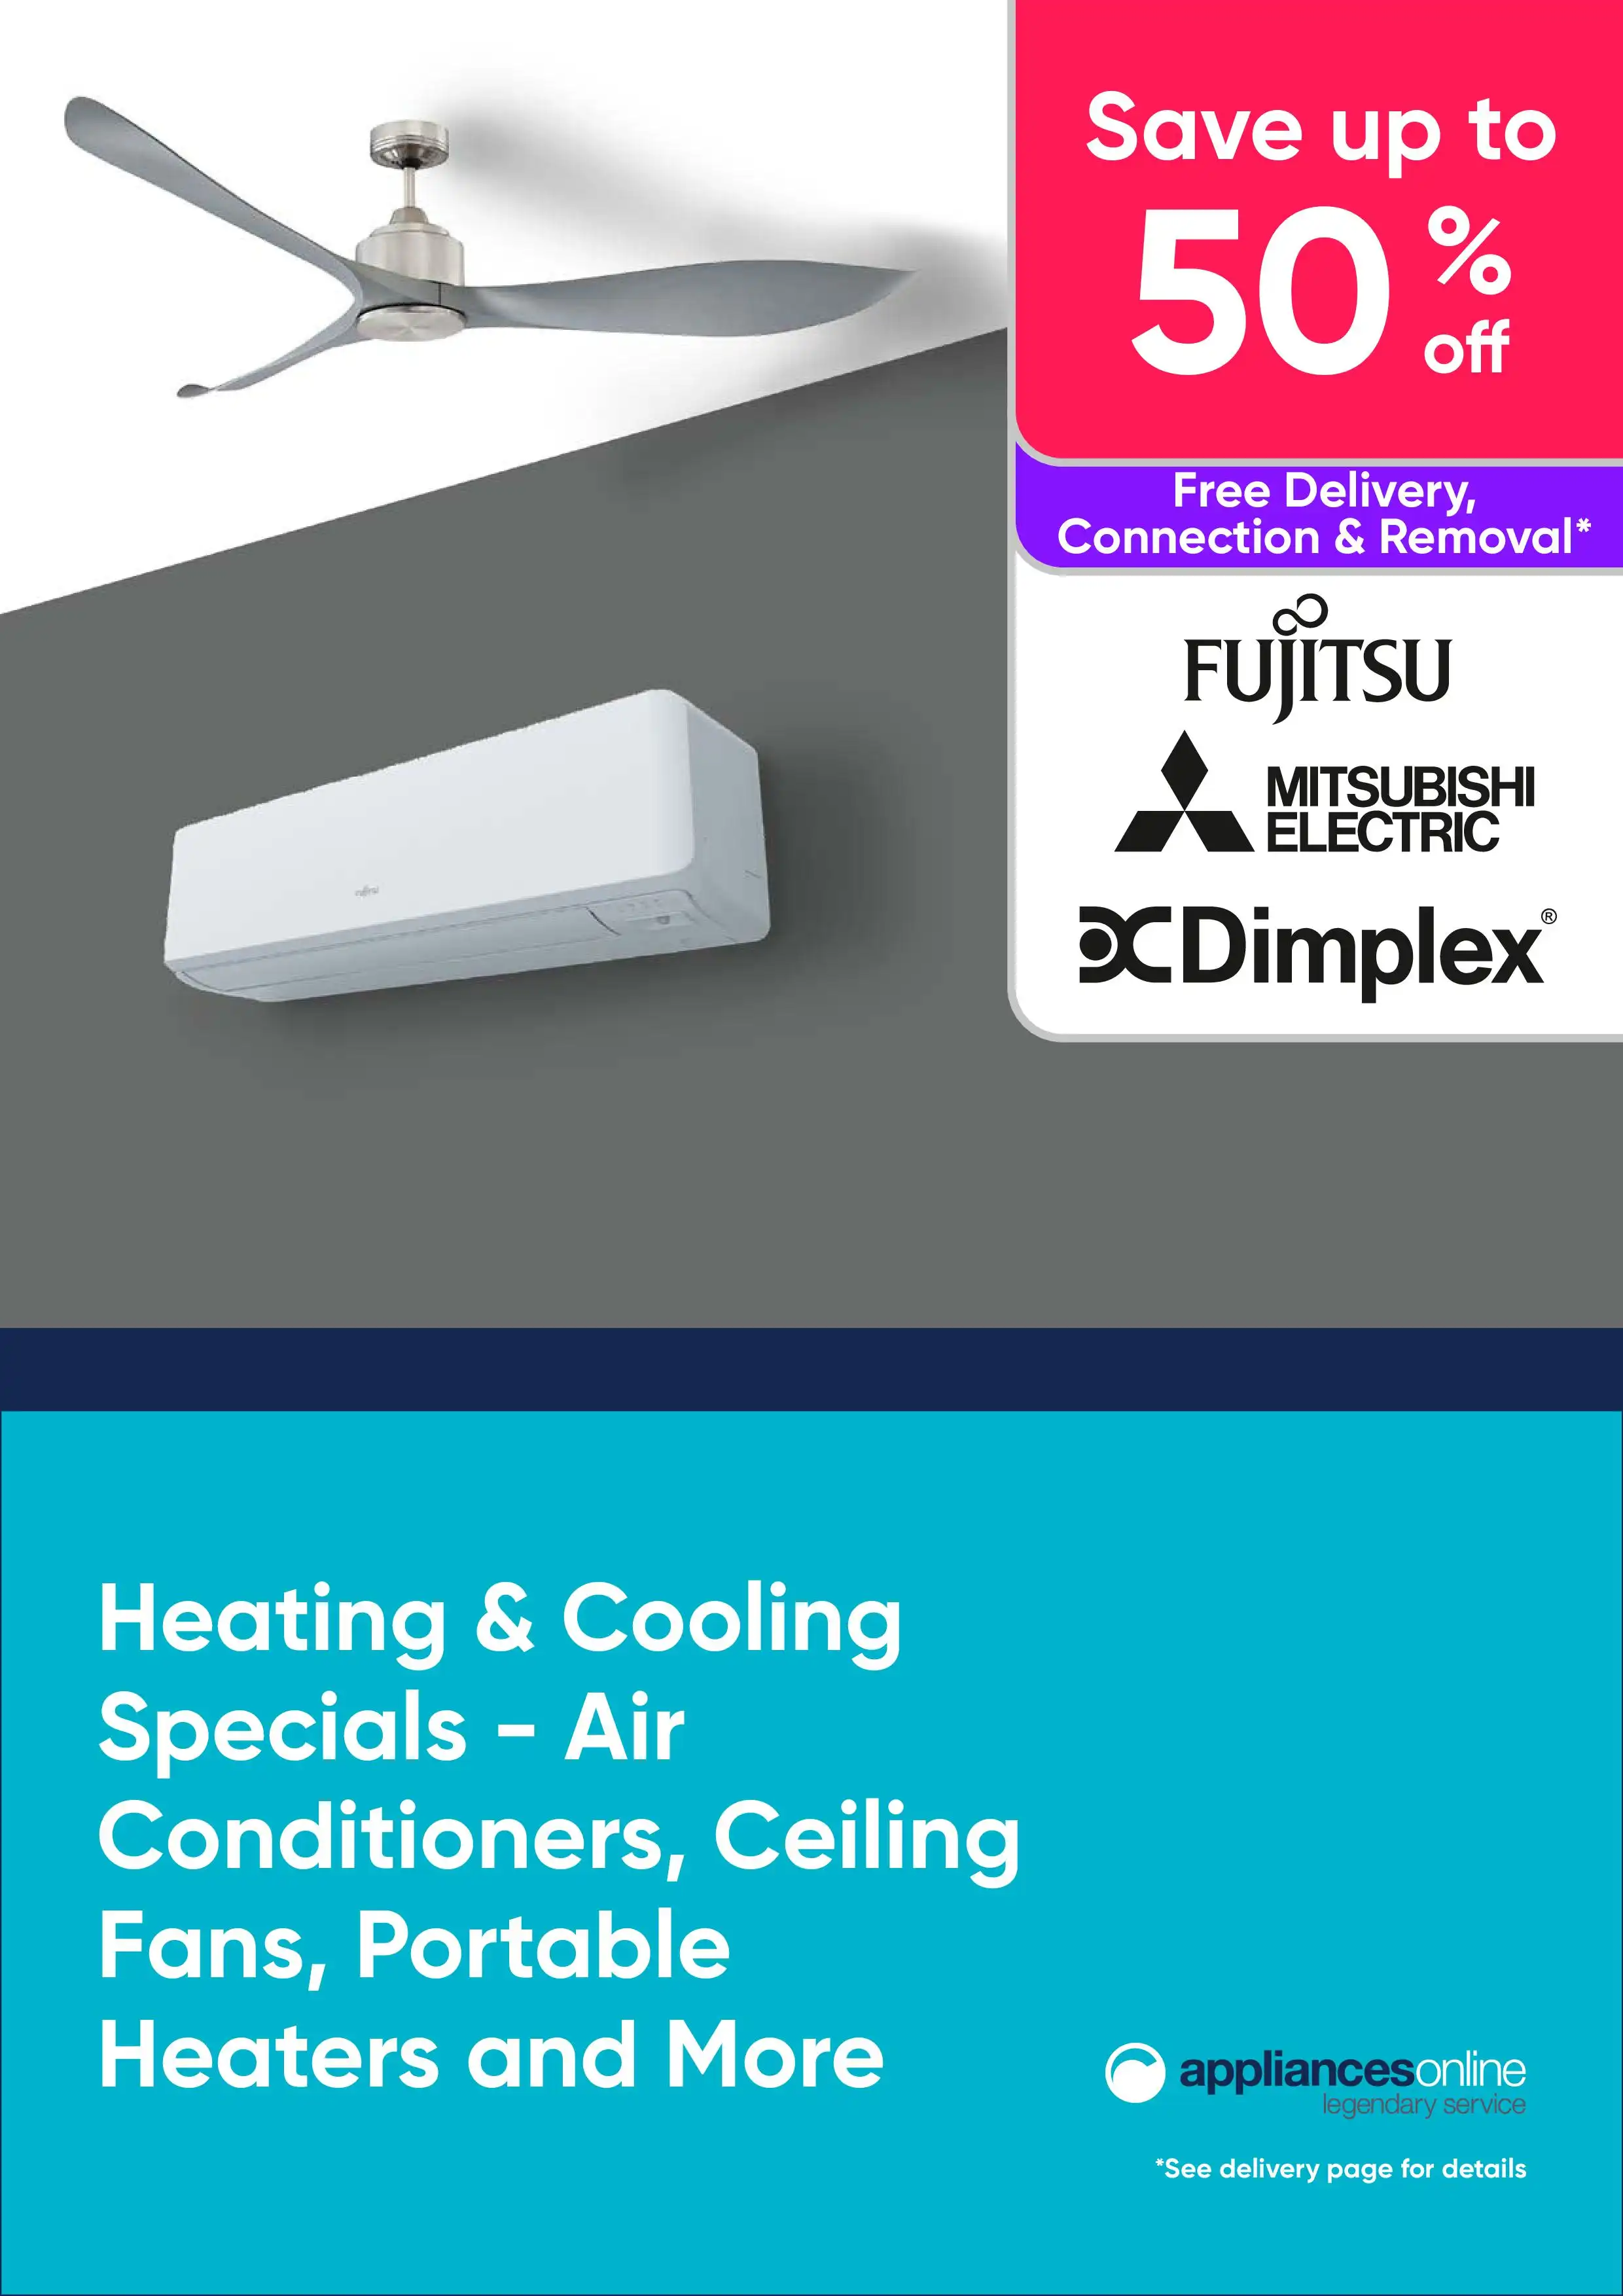 Appliances Online Heating Cooling Specials - Save Up to 50% RRP On Air Conditioners and More